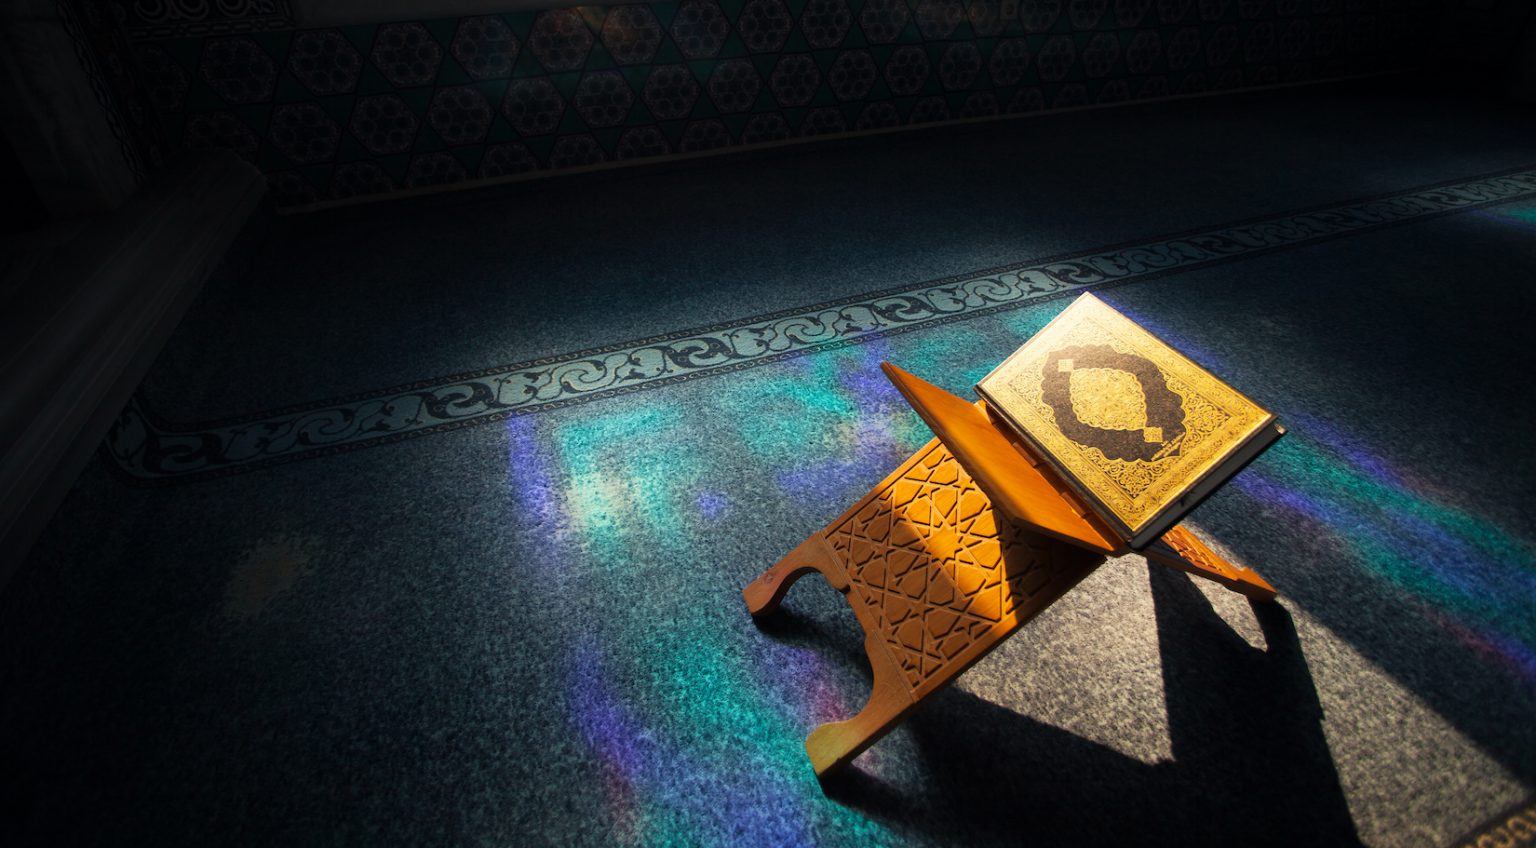 Stock image of Koran in a Mosque